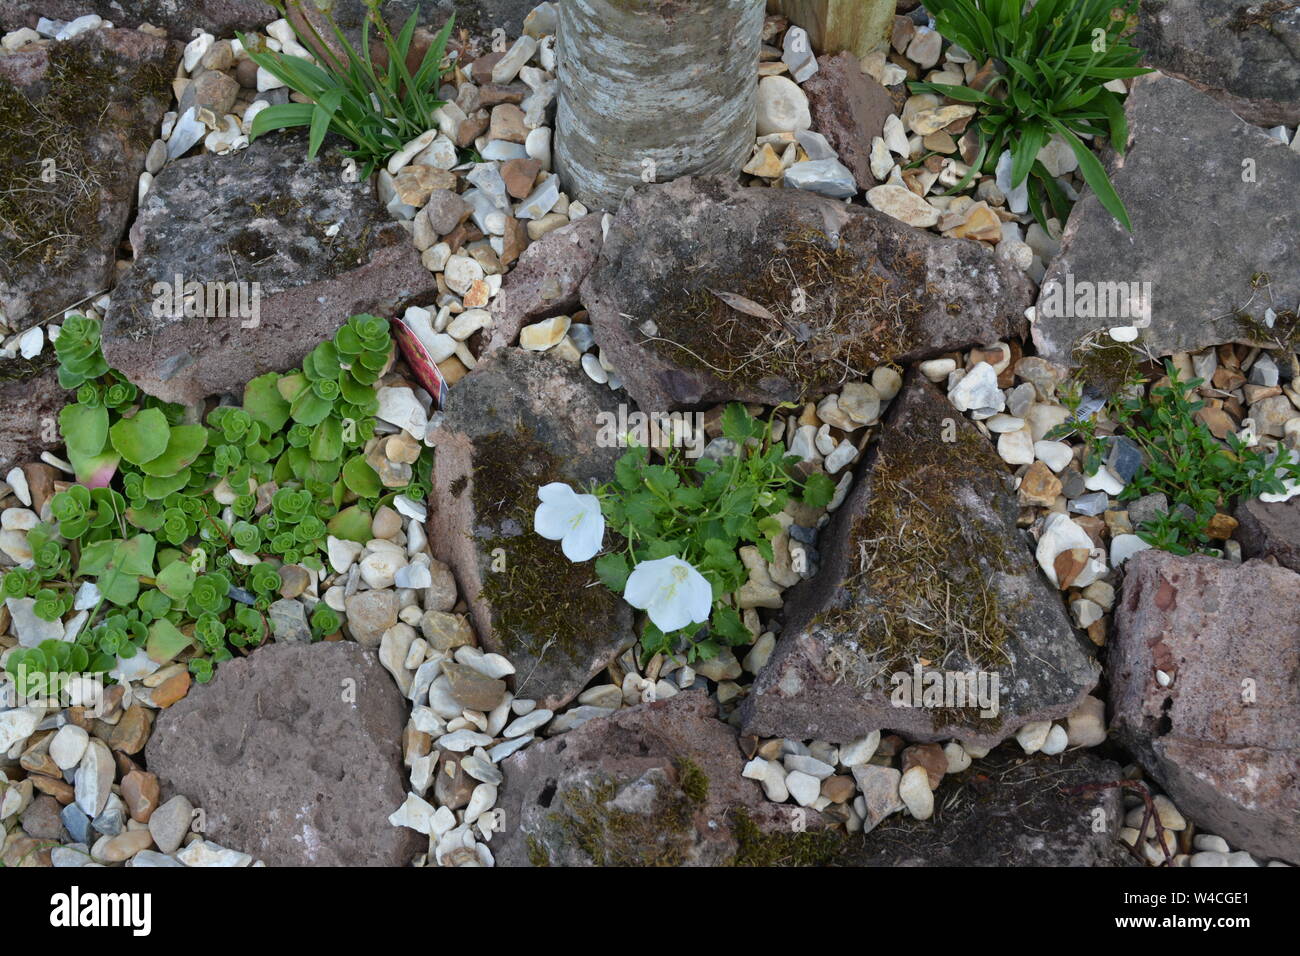 close up of small rockery with moss around a tree stem showing in the background with various green plants and flowers and infilled with small pebbles Stock Photo